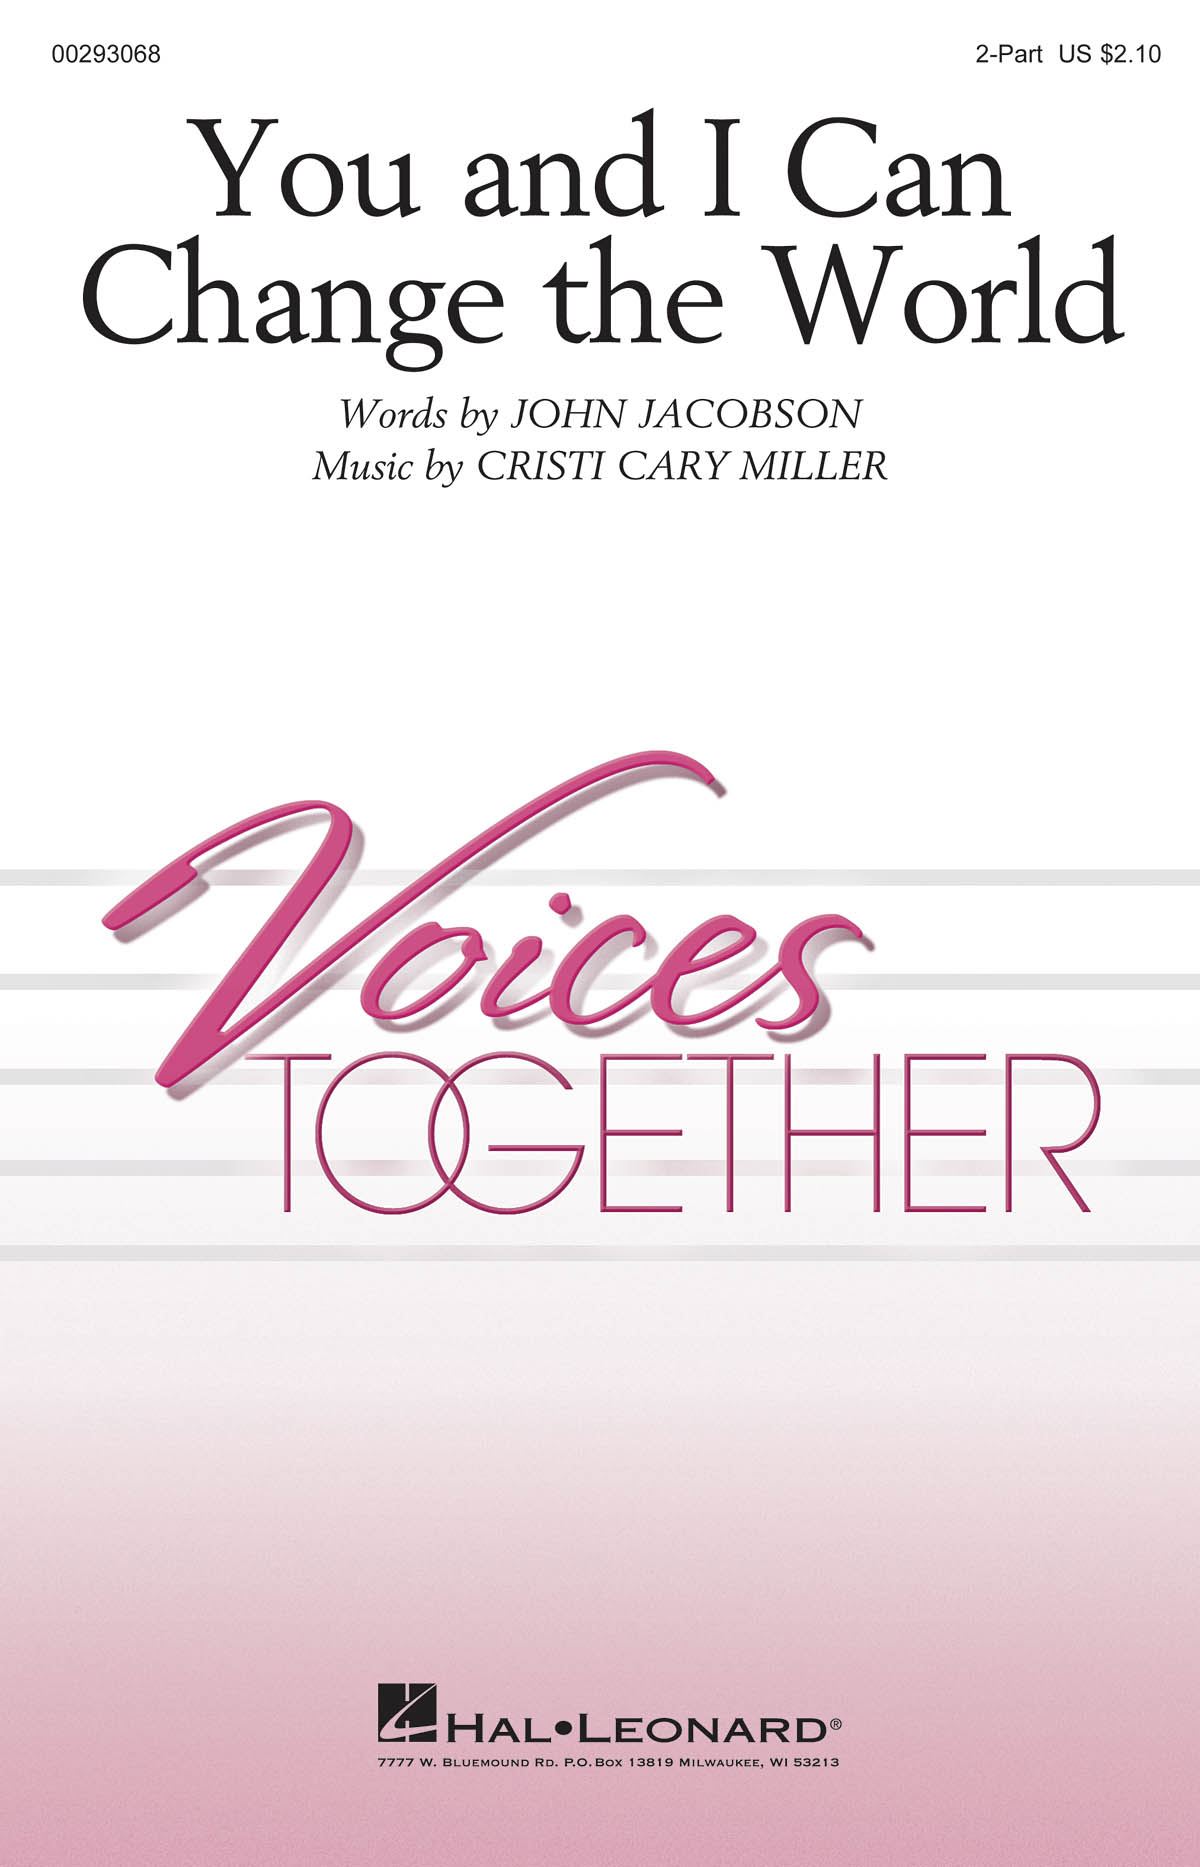 John Jacobson Cristi Cary Miller: You and I Can Change the World: Mixed Choir a